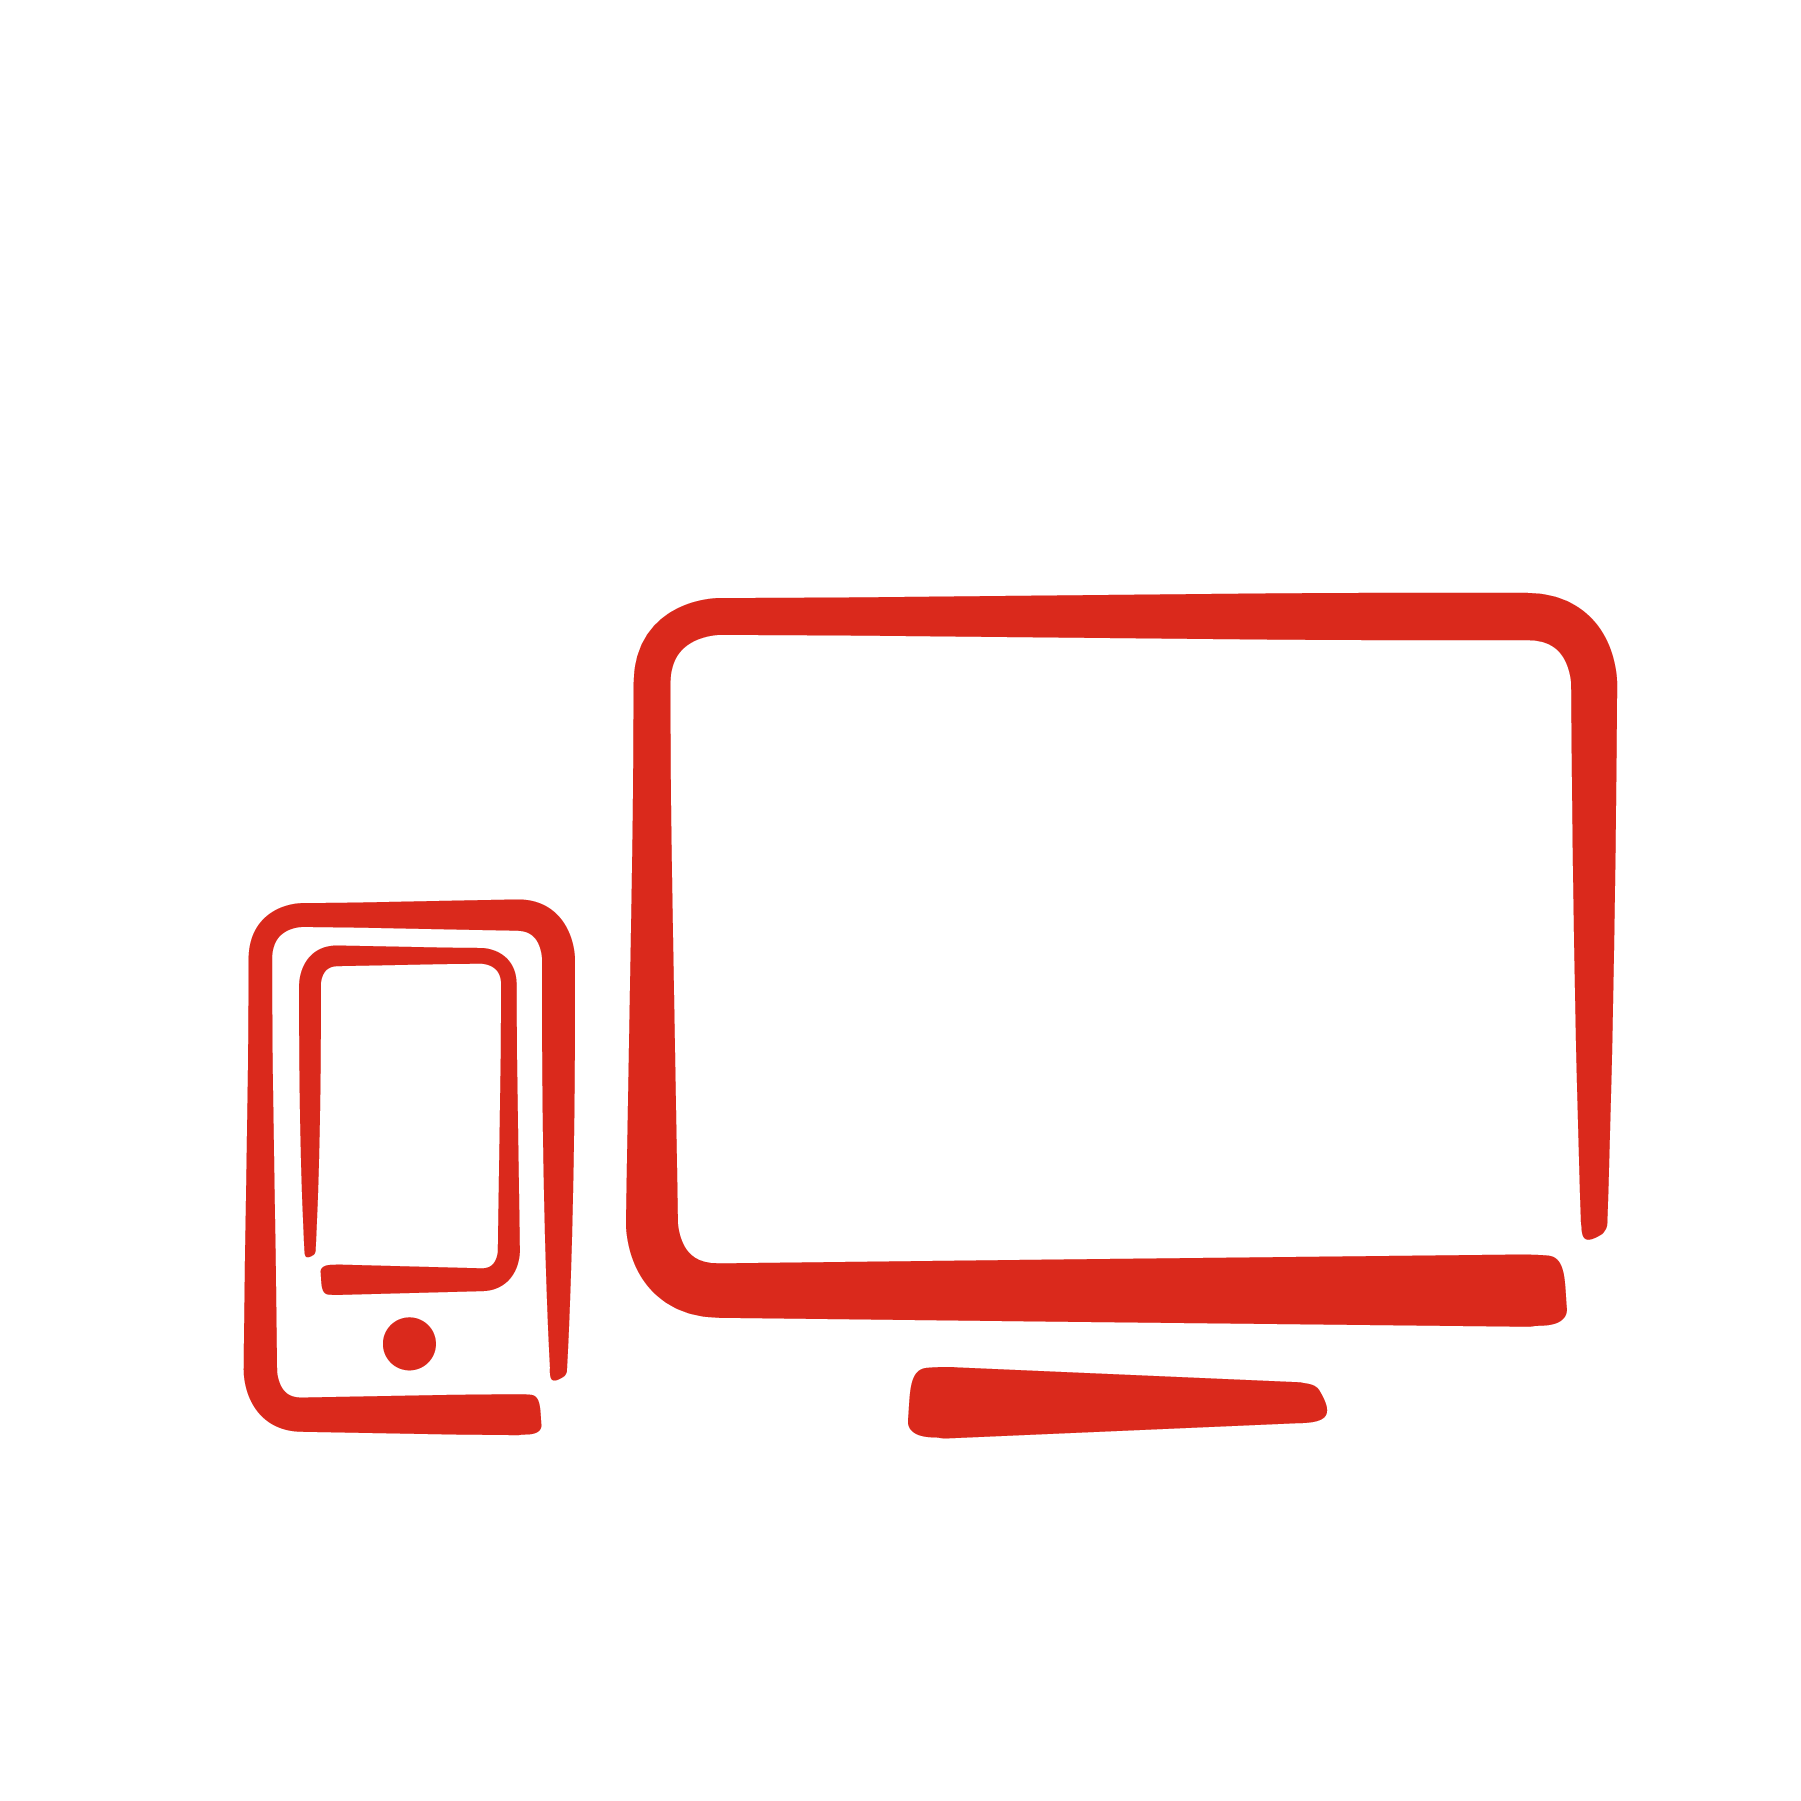 Icon of a smartphone and a monitor, demonstrating our commitment to creating digital solutions for youths. Image credit: Save the Children, 2017. 